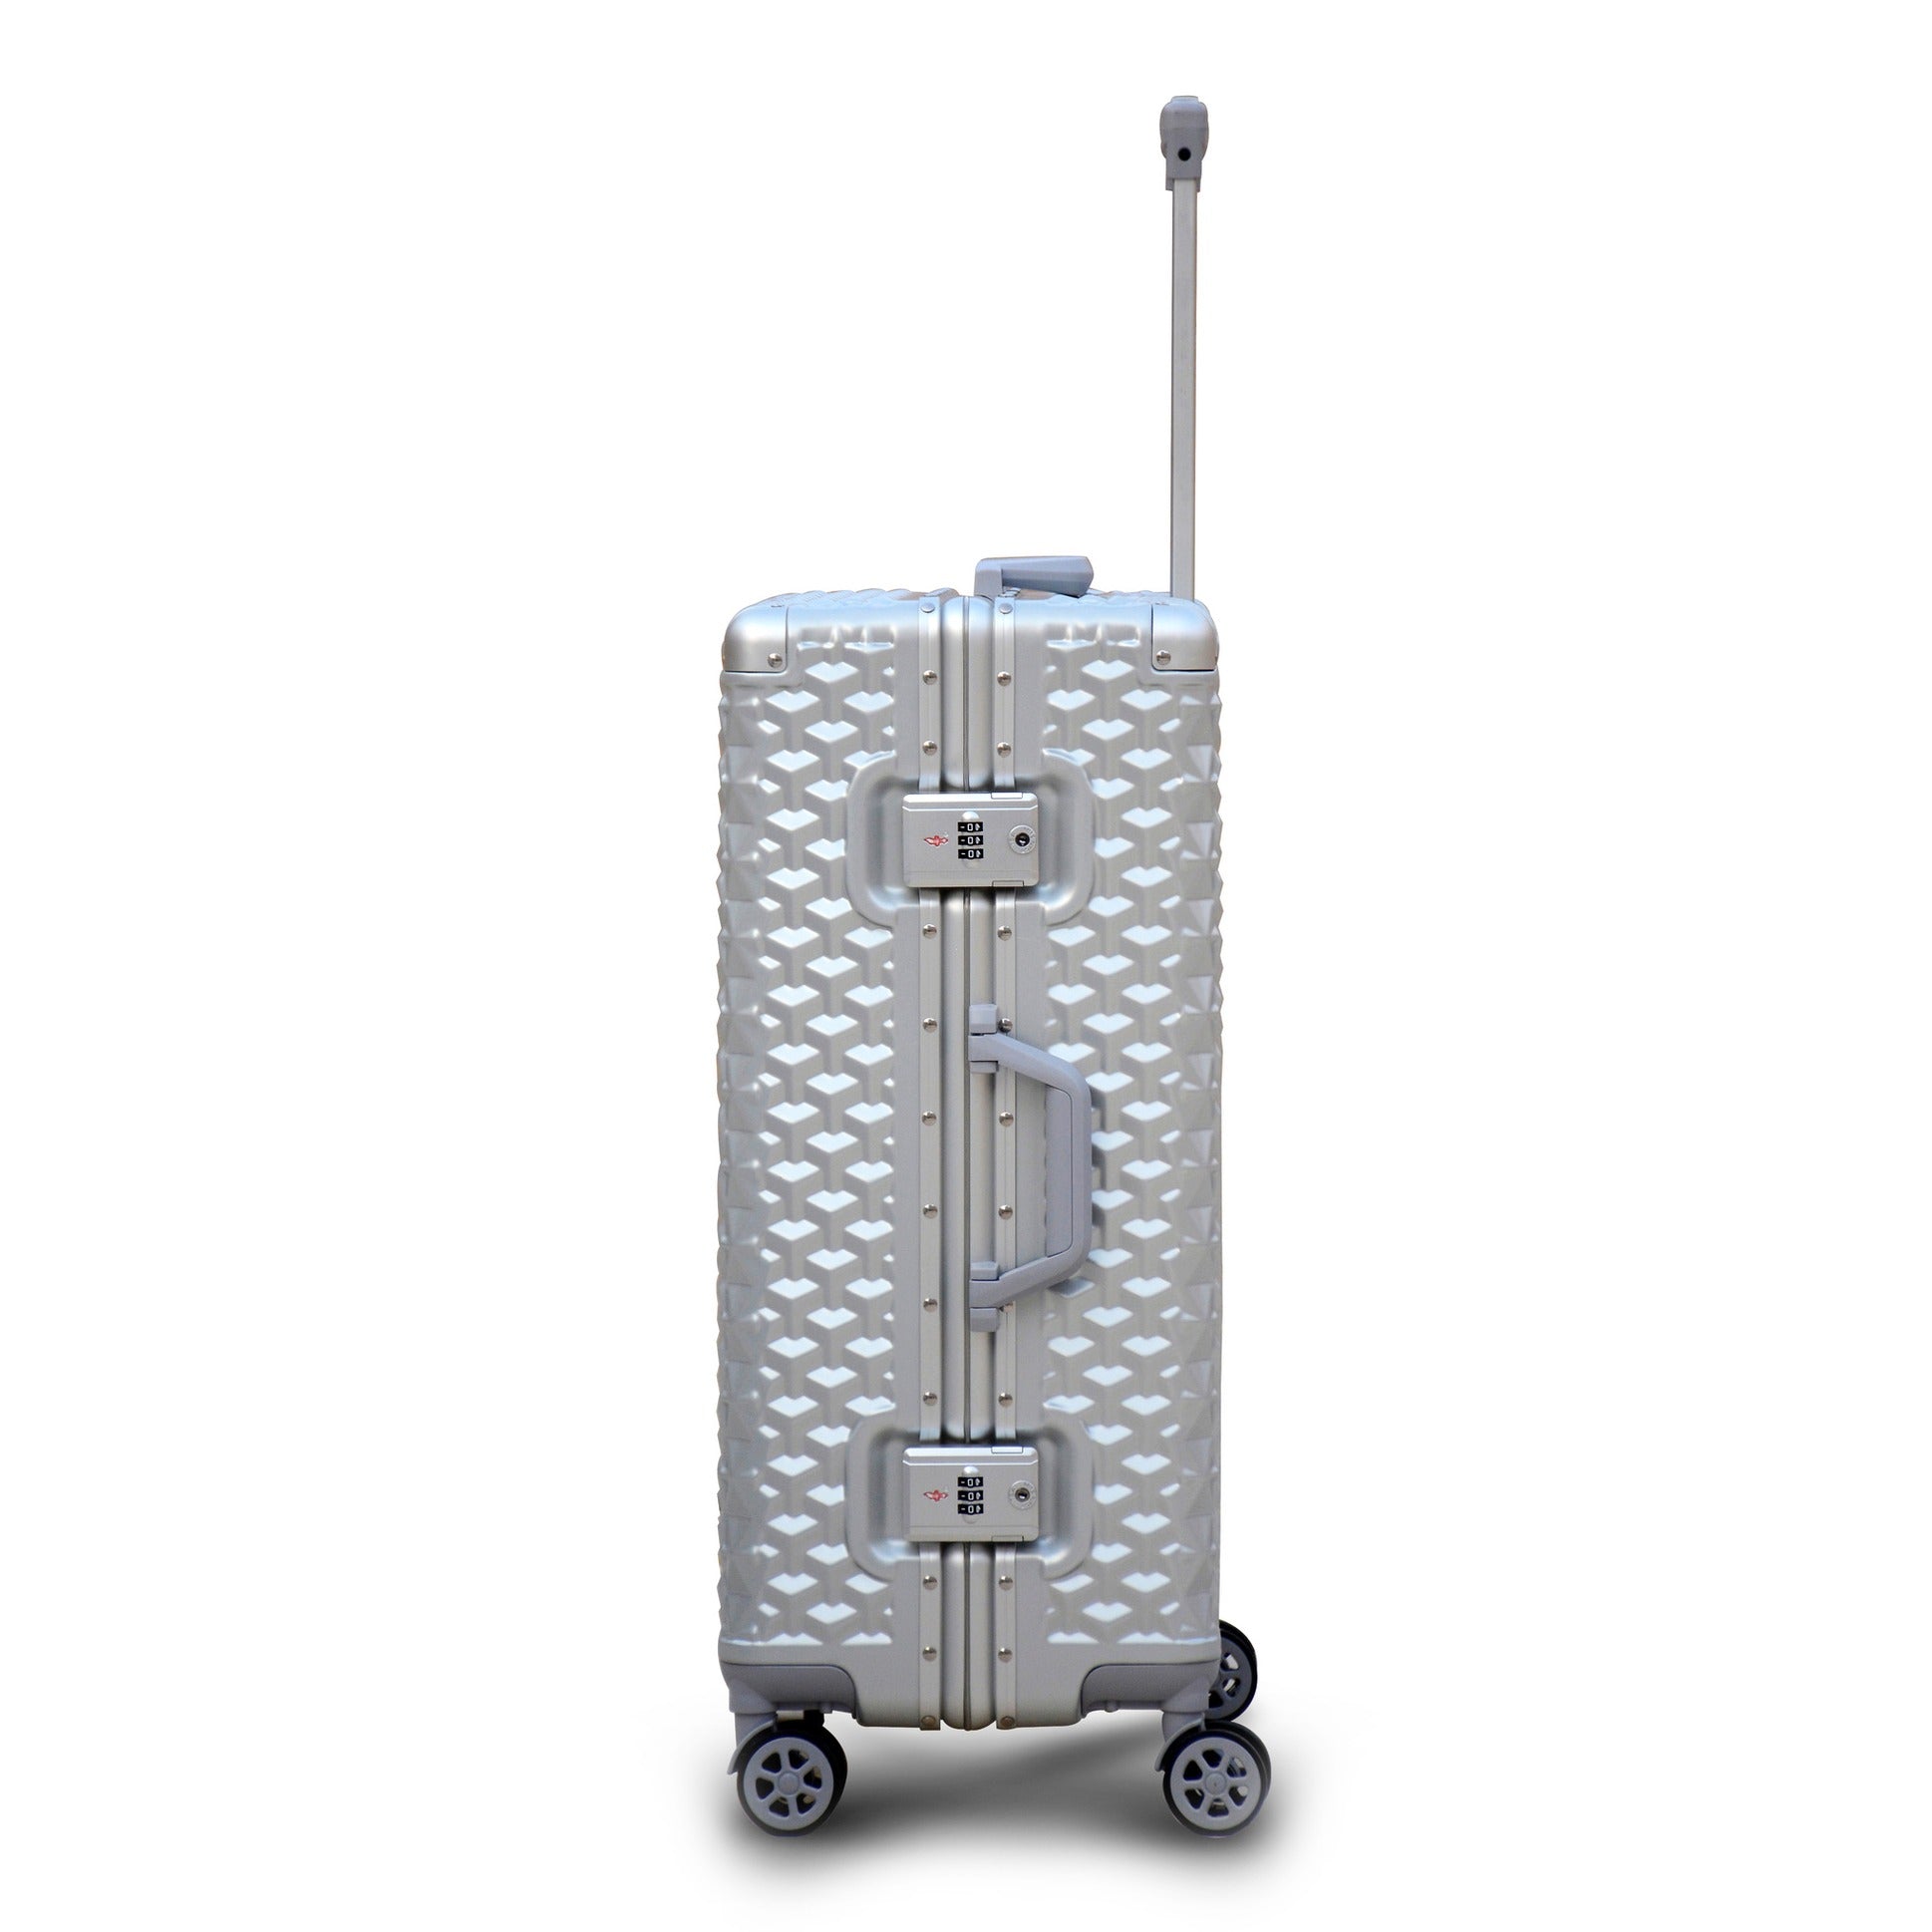 3 Piece Set 20" 24" 28 Inches Silver Colour Aluminium Framed 3D Diamond ABS Hard Shell Without Zipper Luggage Zaappy.com